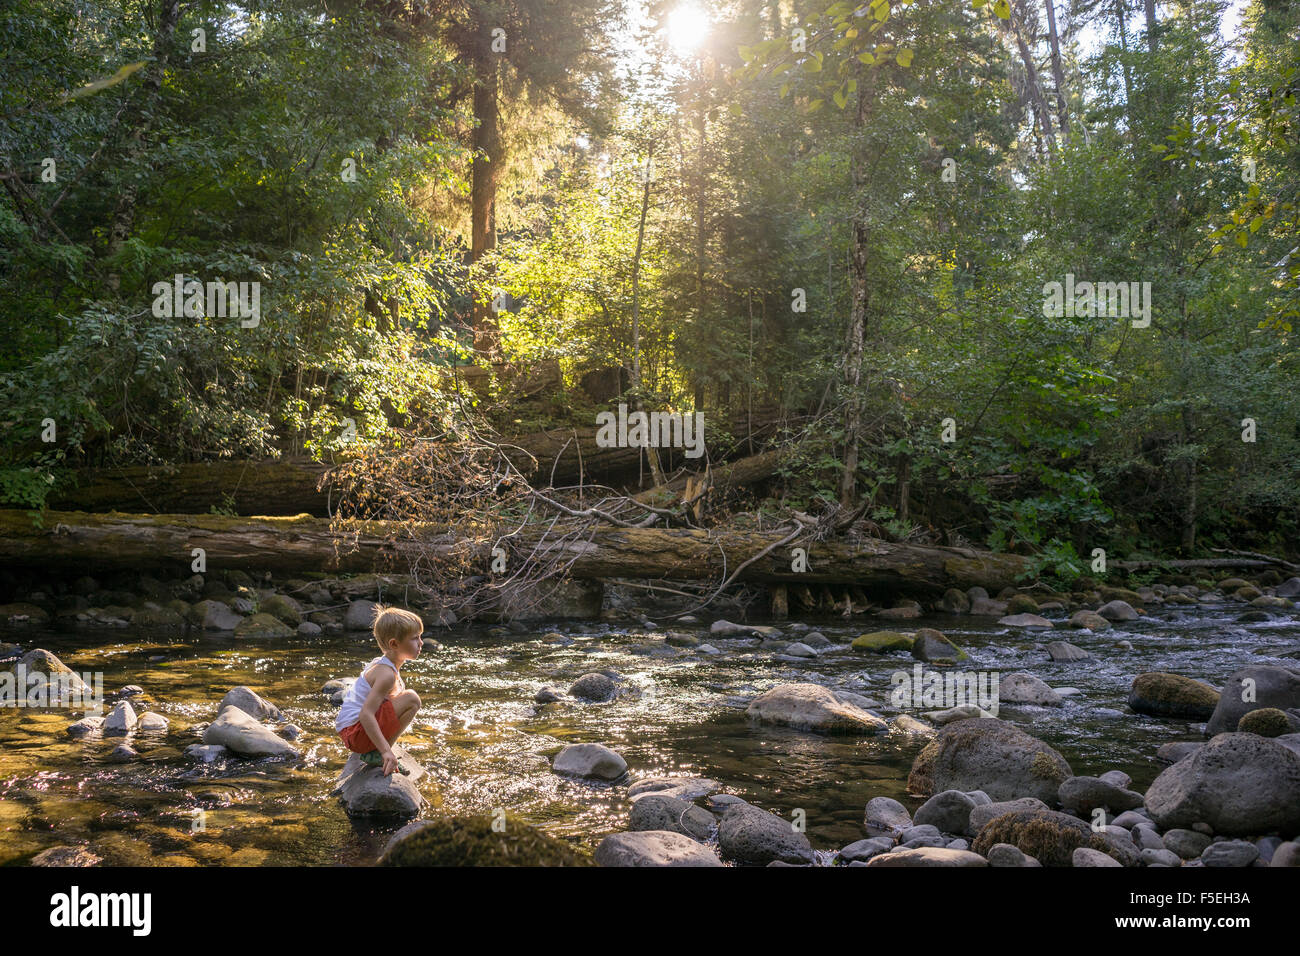 Boy sitting on a rock in forest creek Stock Photo